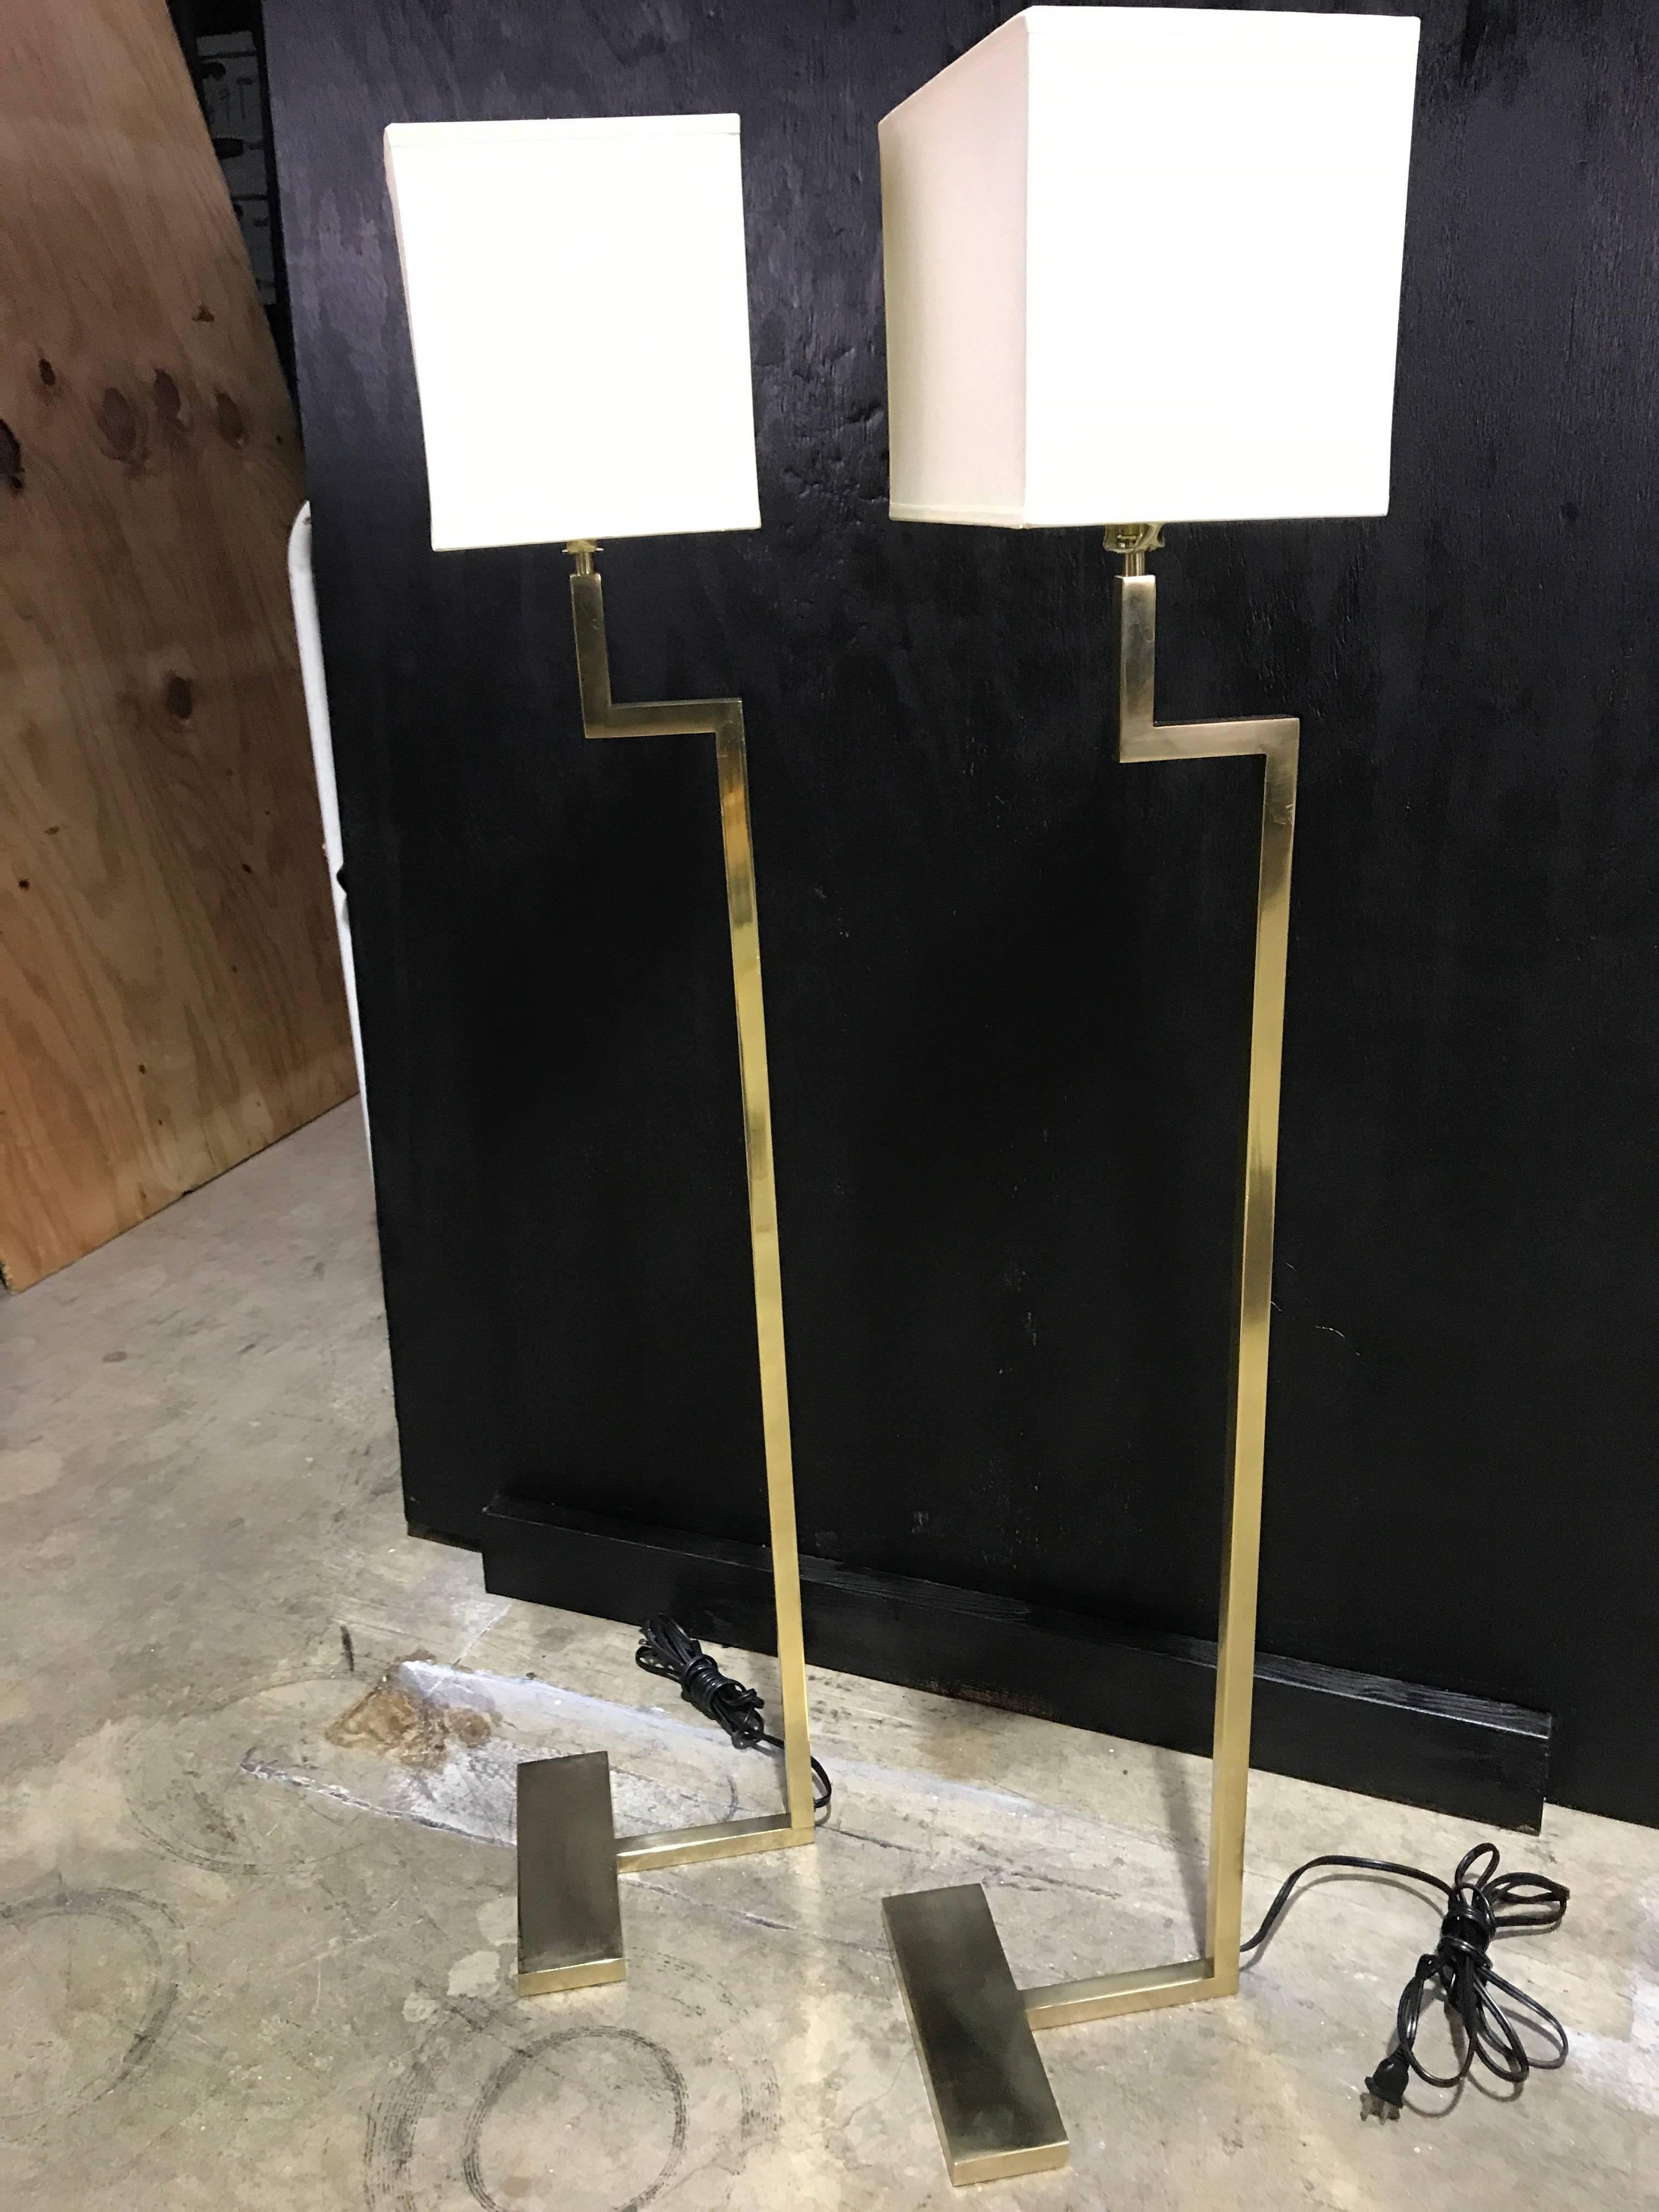 Pair of French modern brass floor lamps by Jacques Quinet
literature, Jacques Quinet, G. Maldonado, similar examples illustrated.
 